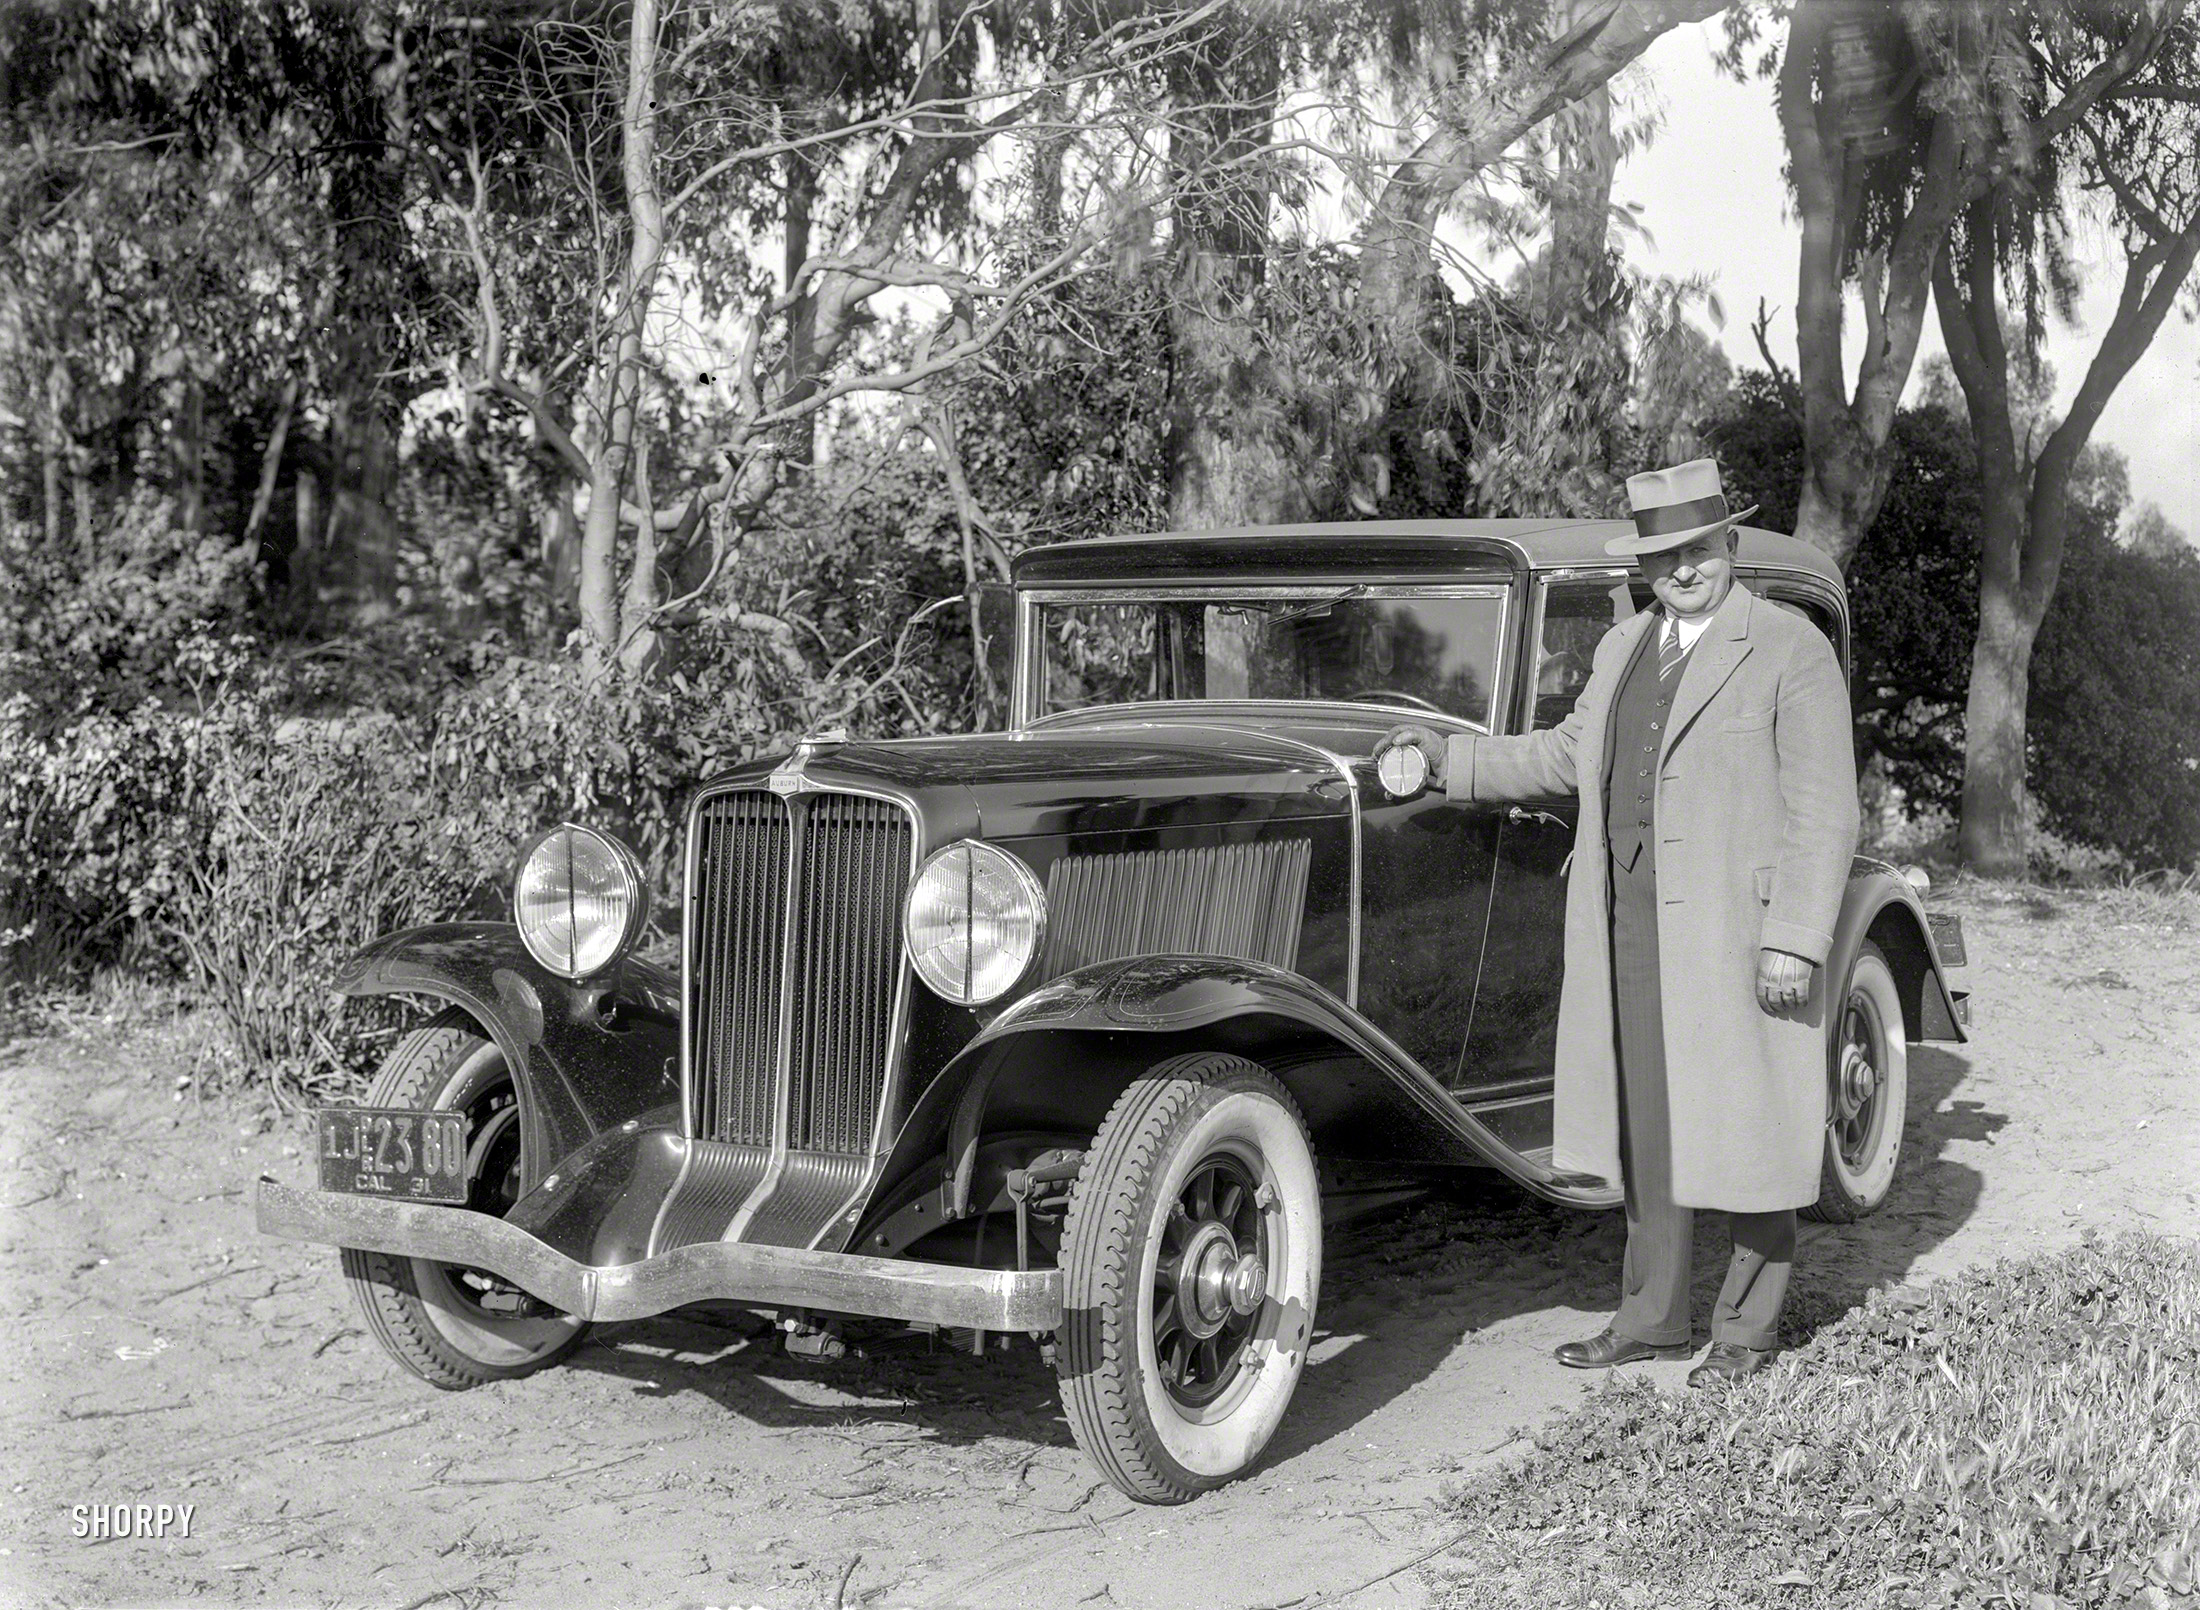 San Francisco circa 1931. "Auburn at Golden Gate Park." This feline phaeton is the latest entry in the Shorpy Catalog of Discontinued Conveyances. 5x7 inch glass negative by automotive amanuensis Christopher Helin. View full size.
